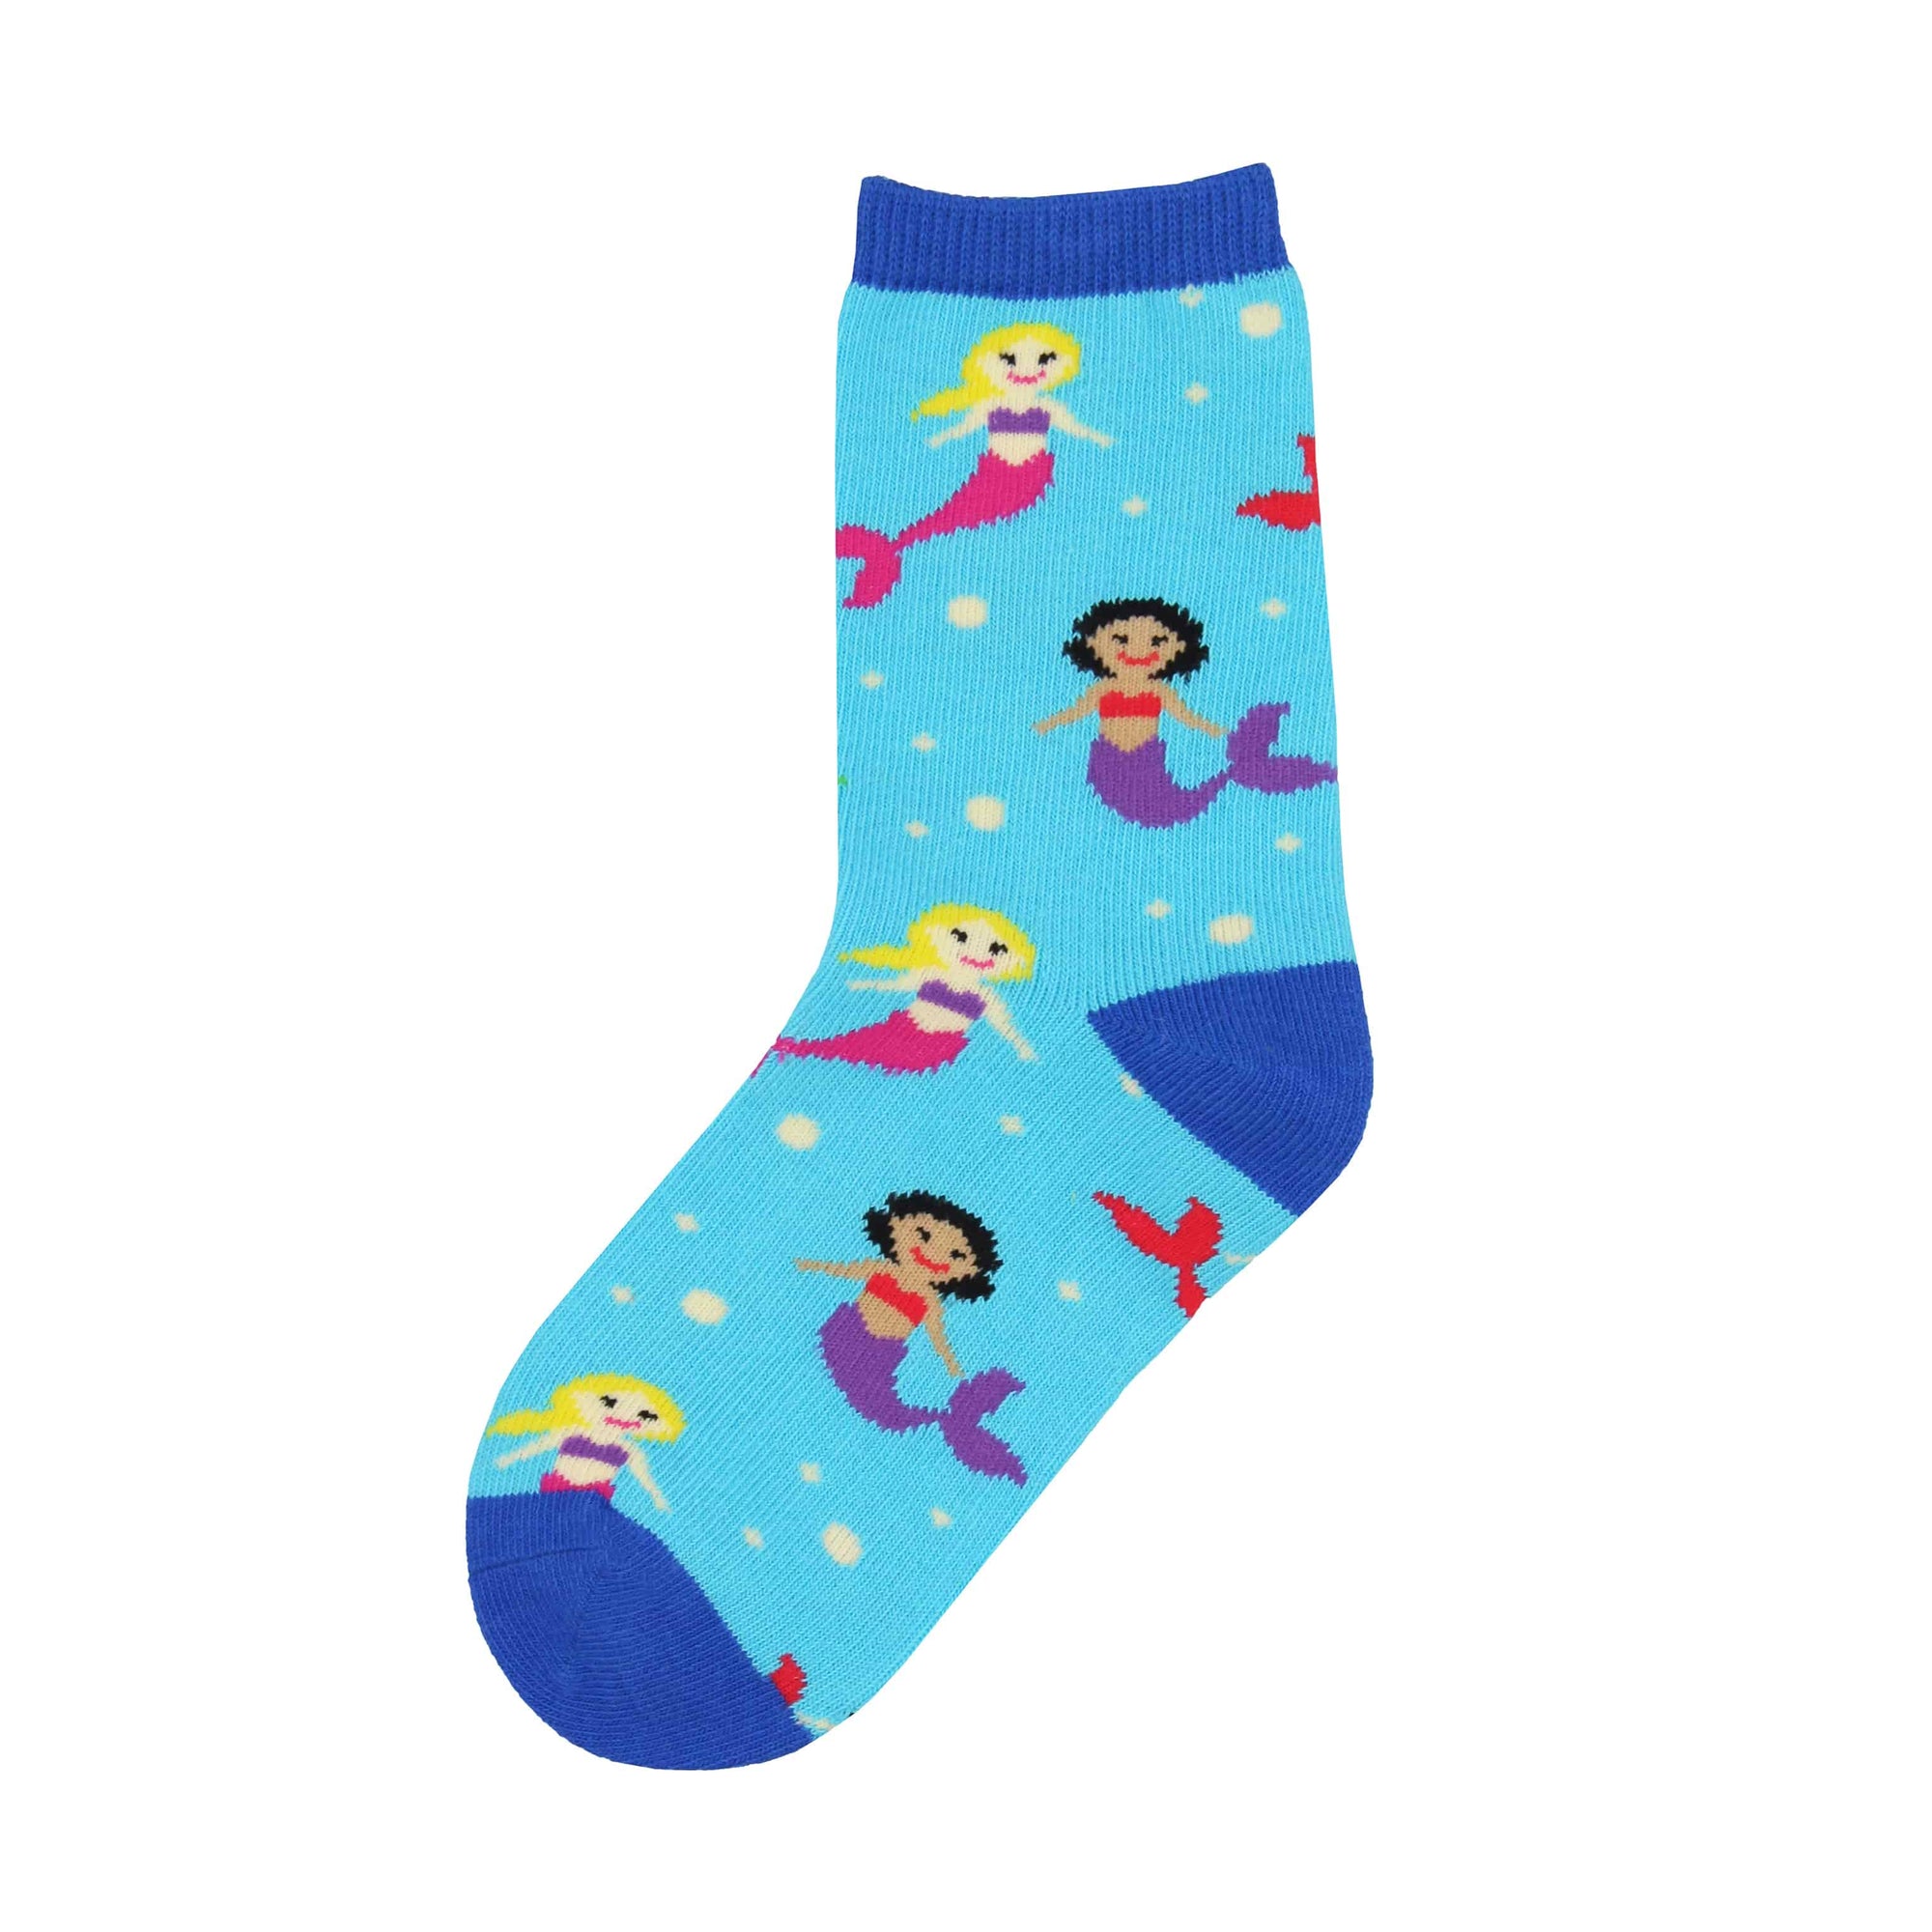 These kids' socks are covered in ethnically diverse mermaids living in harmony under the sea.